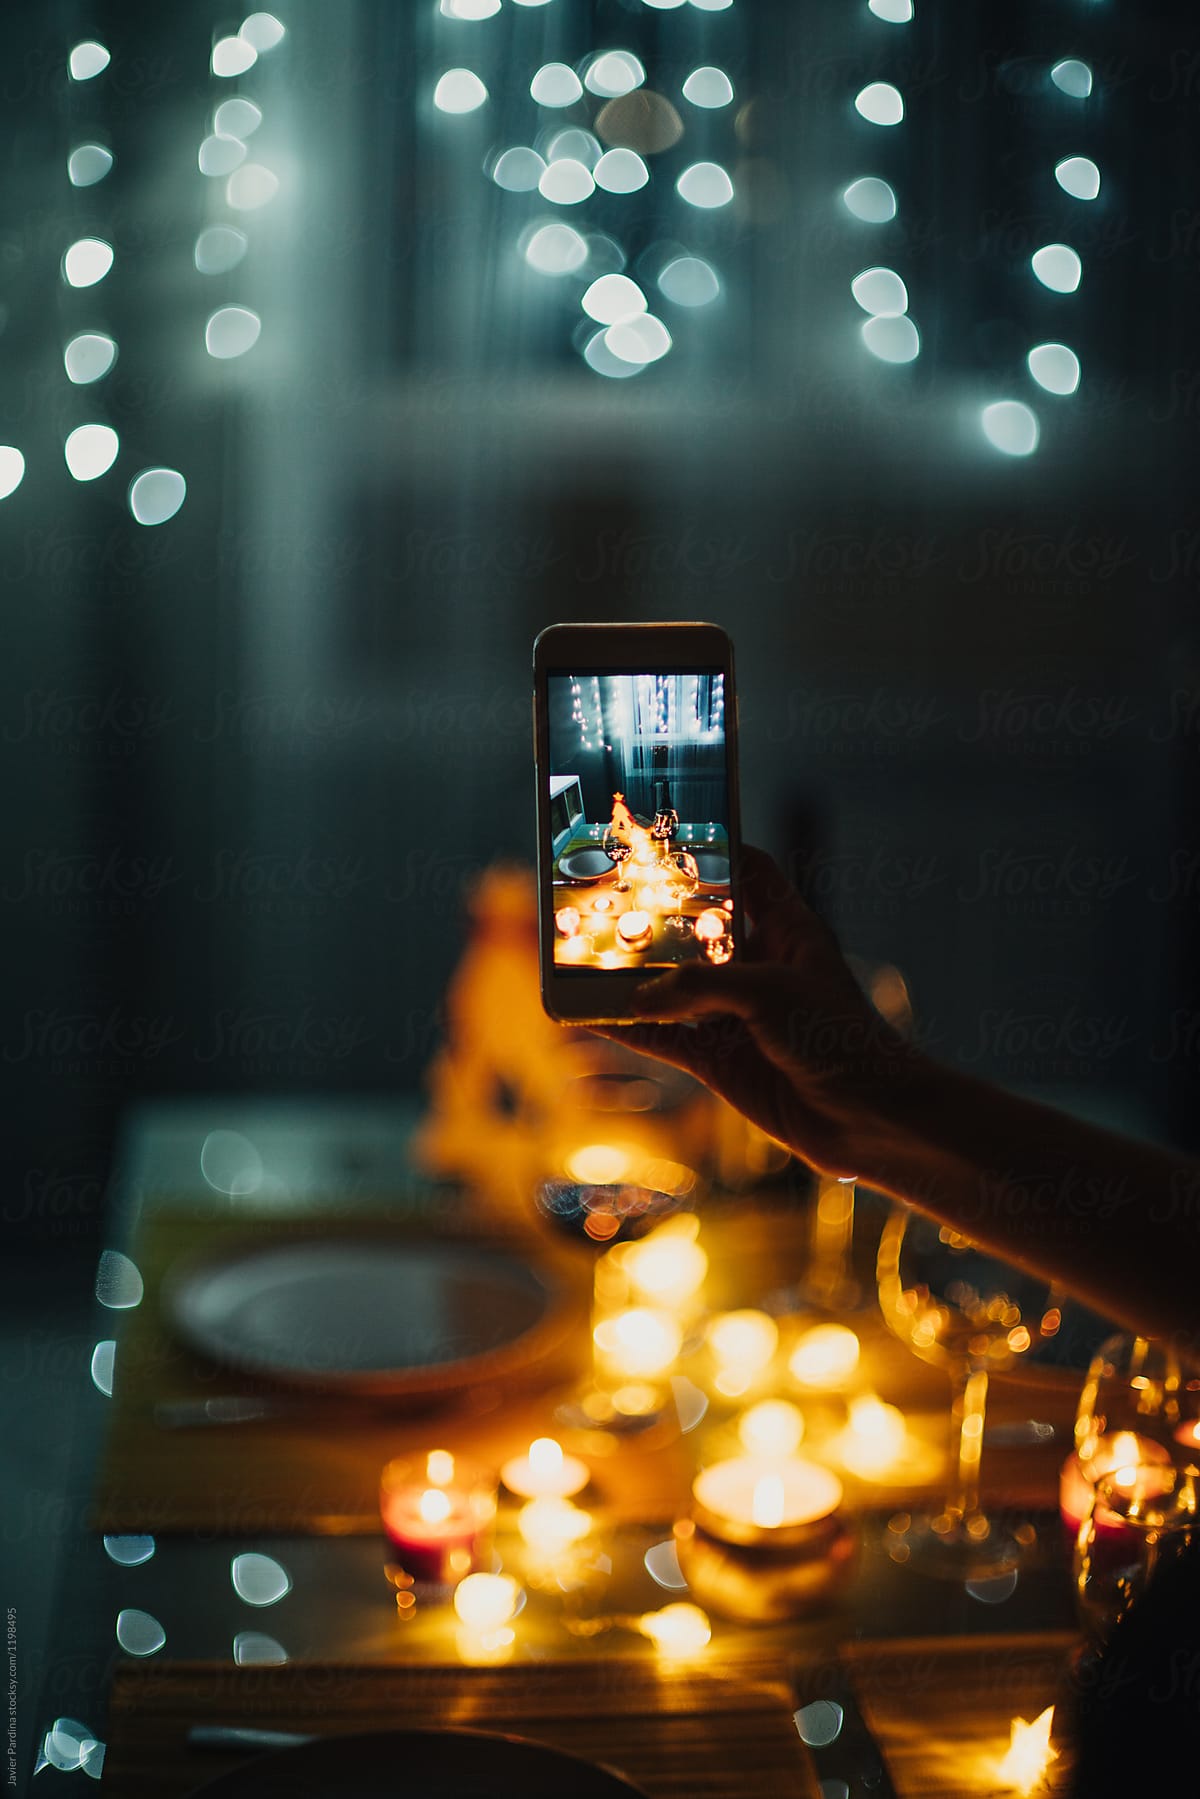 Taking picture of food and wine with cellphone